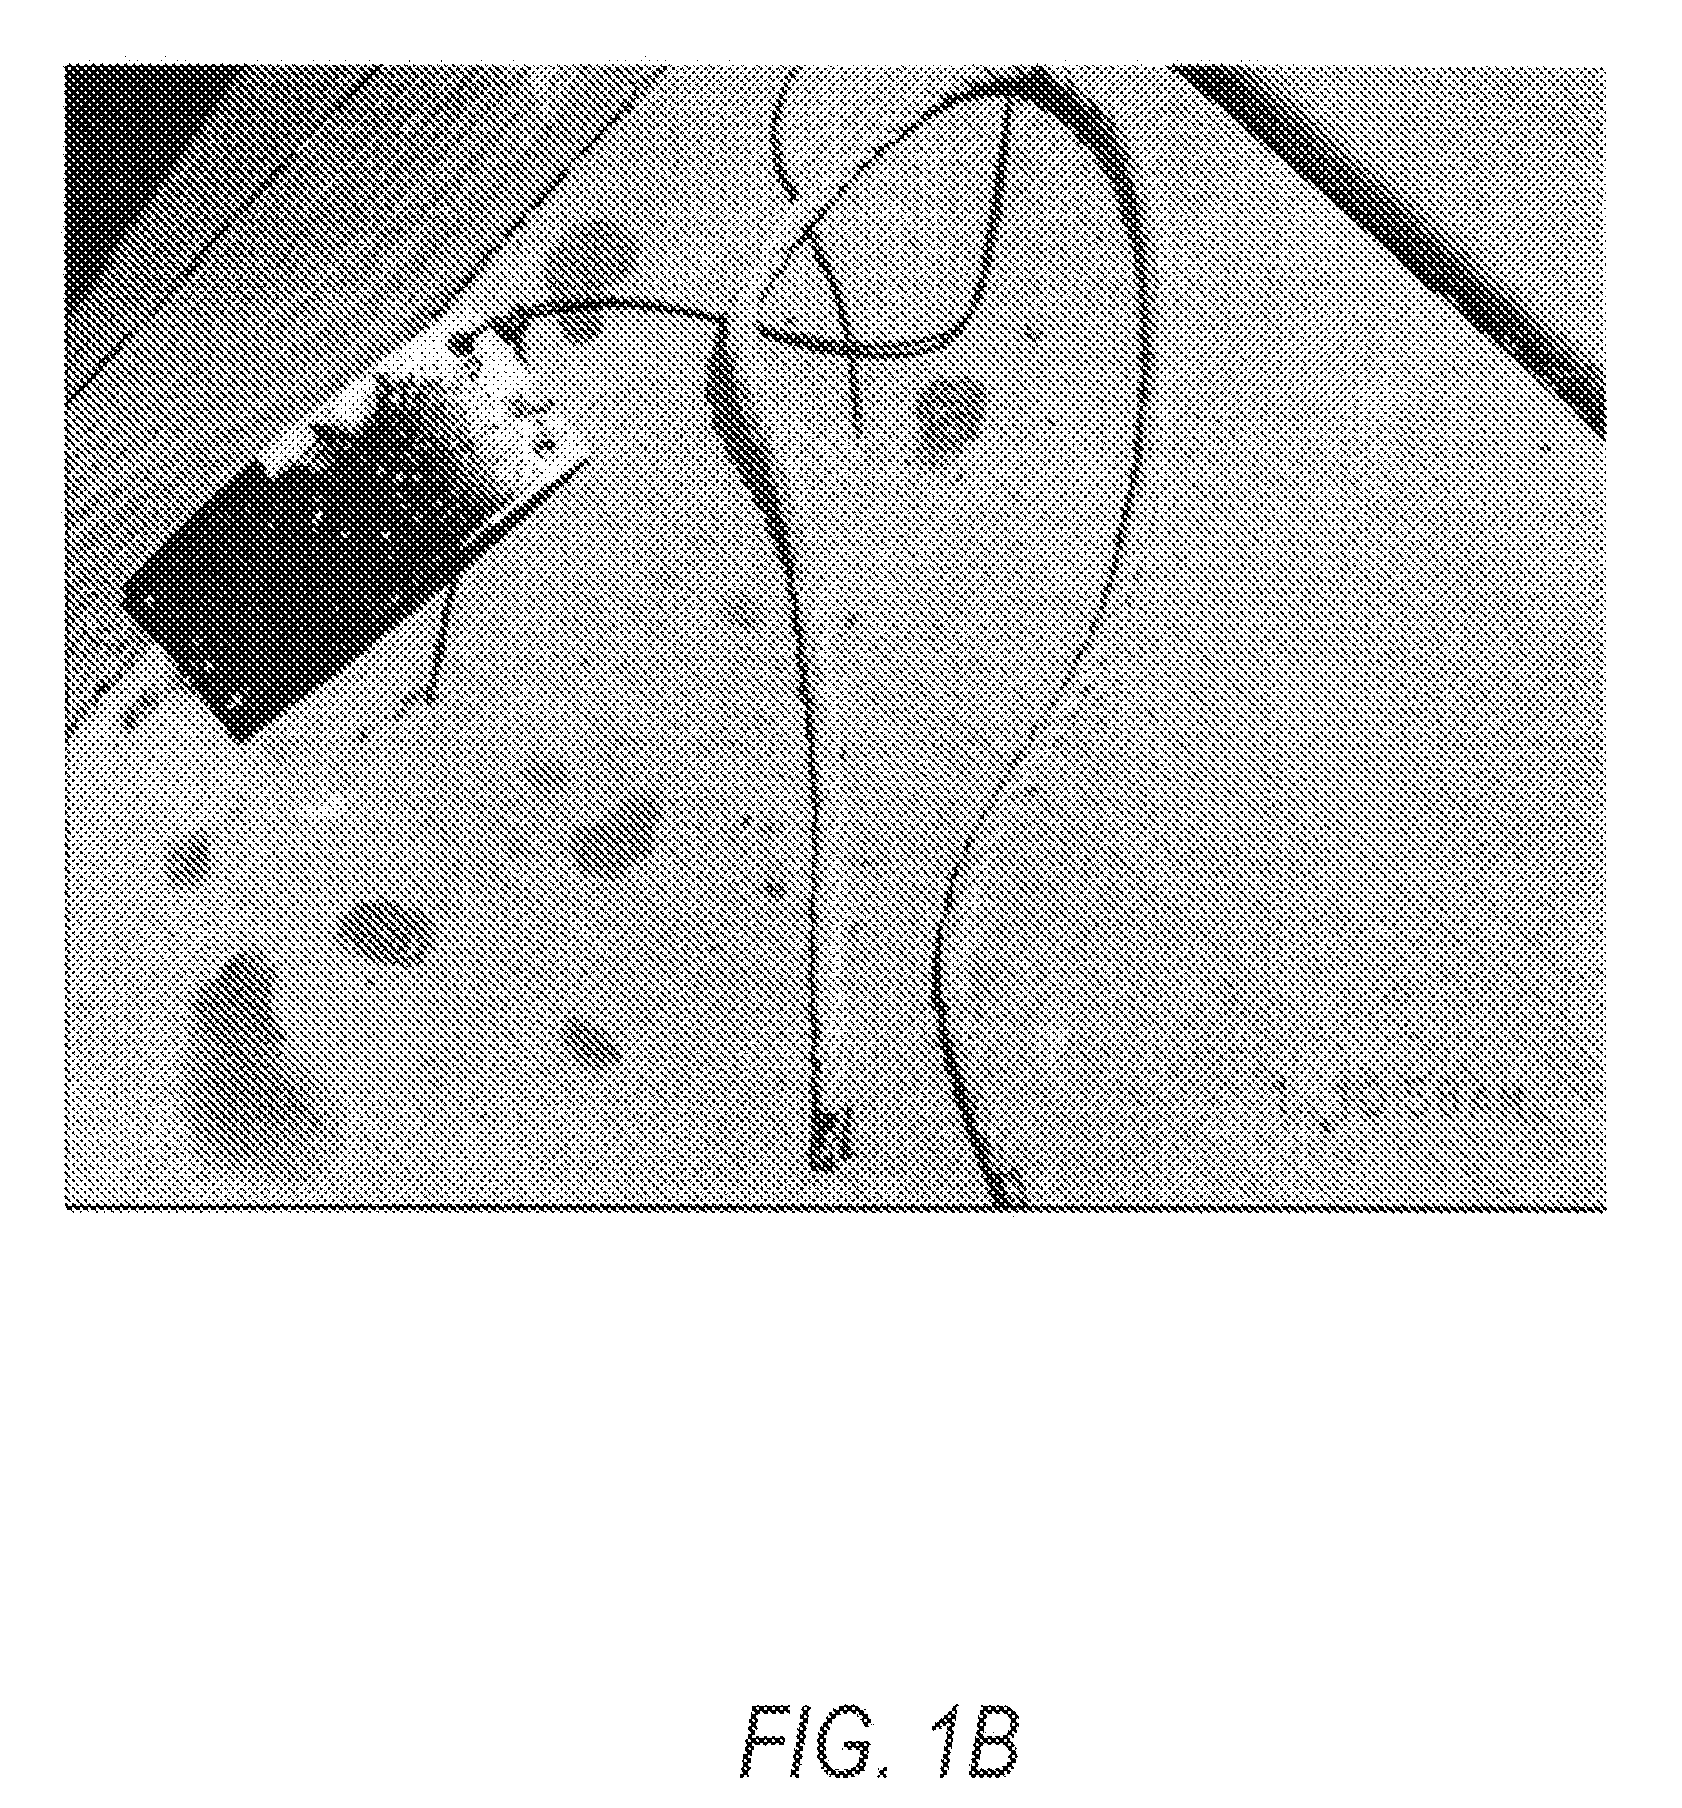 Polymer coatings containing phytochemical agents and methods for making and using same